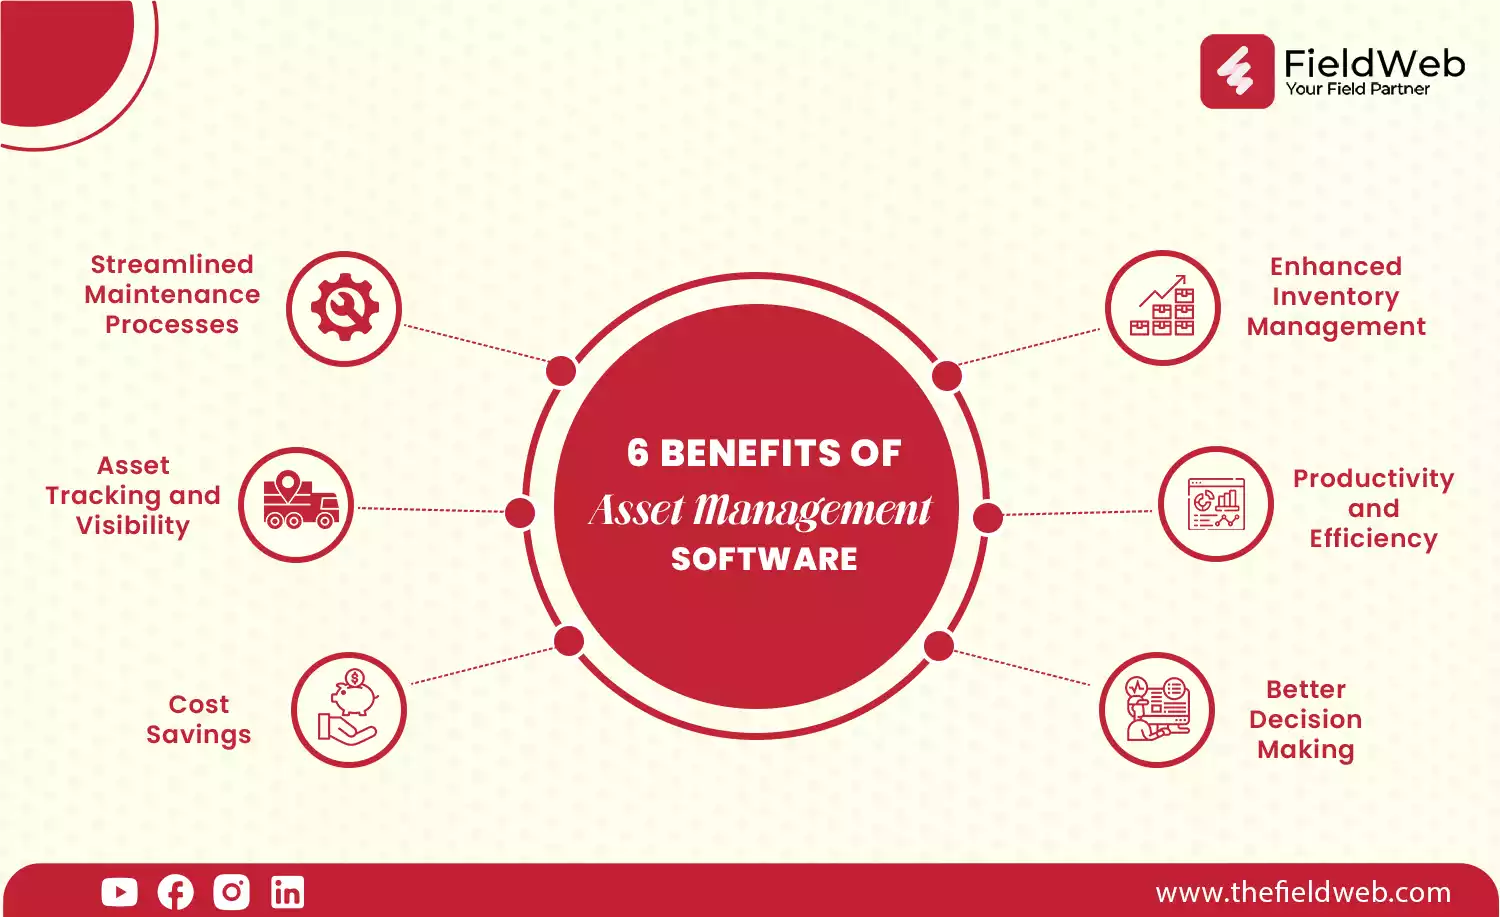 image is displaying 6 benefits of asset management software